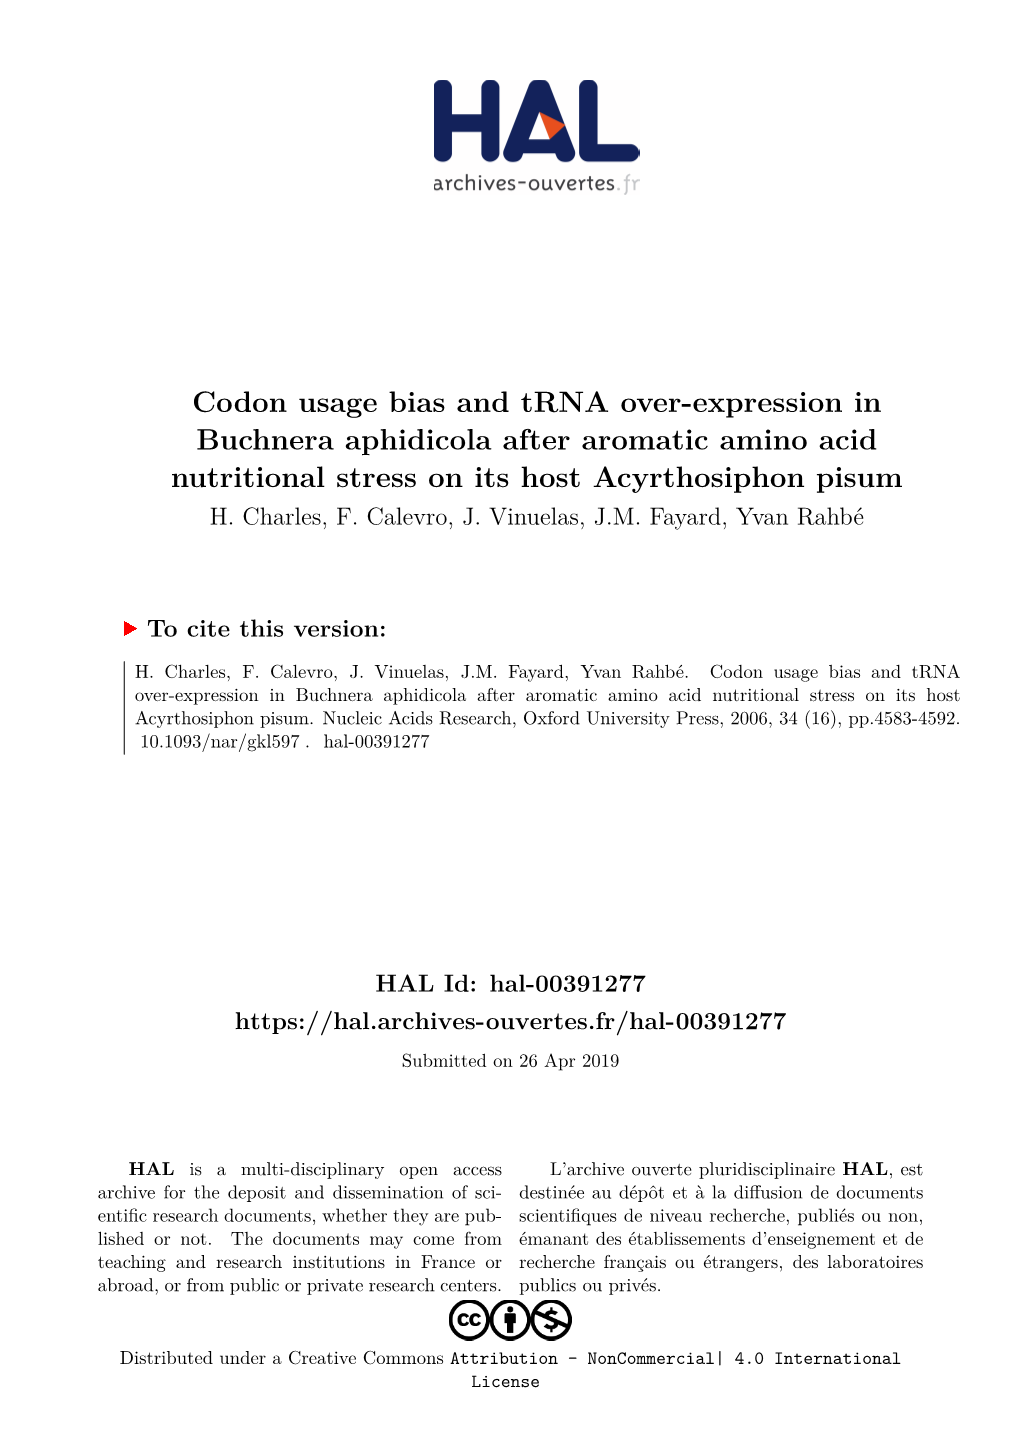 Codon Usage Bias and Trna Over-Expression in Buchnera Aphidicola After Aromatic Amino Acid Nutritional Stress on Its Host Acyrthosiphon Pisum H